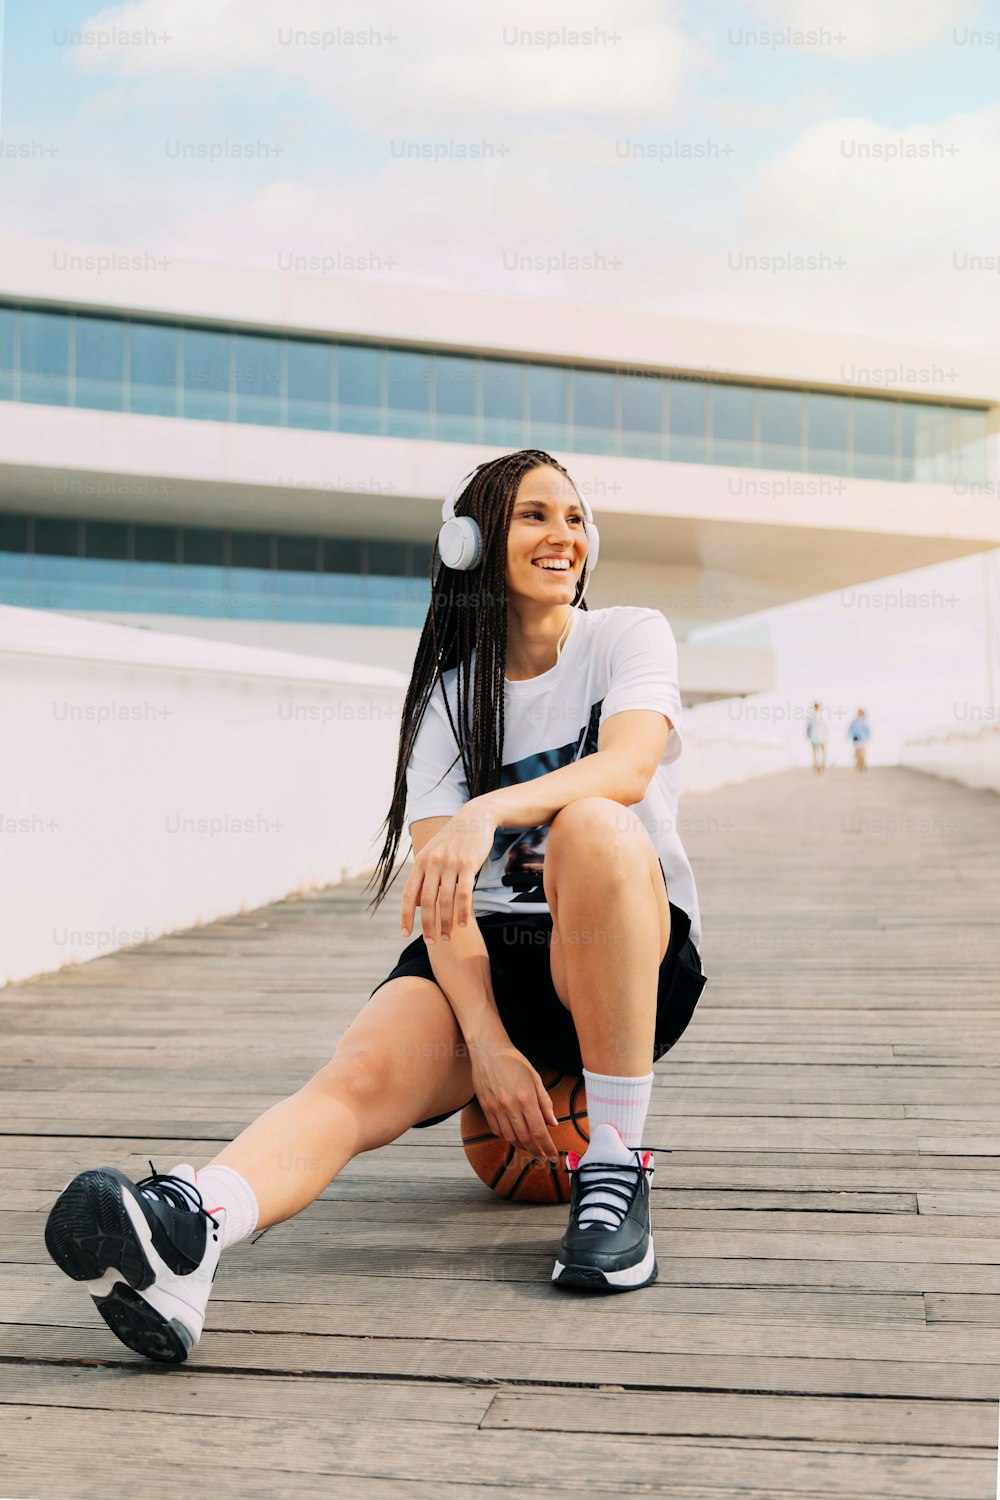 Smiling woman listening to music with headphones, urban sportswear sitting on a basketball. With futuristic glass building in background. Happiness and sport